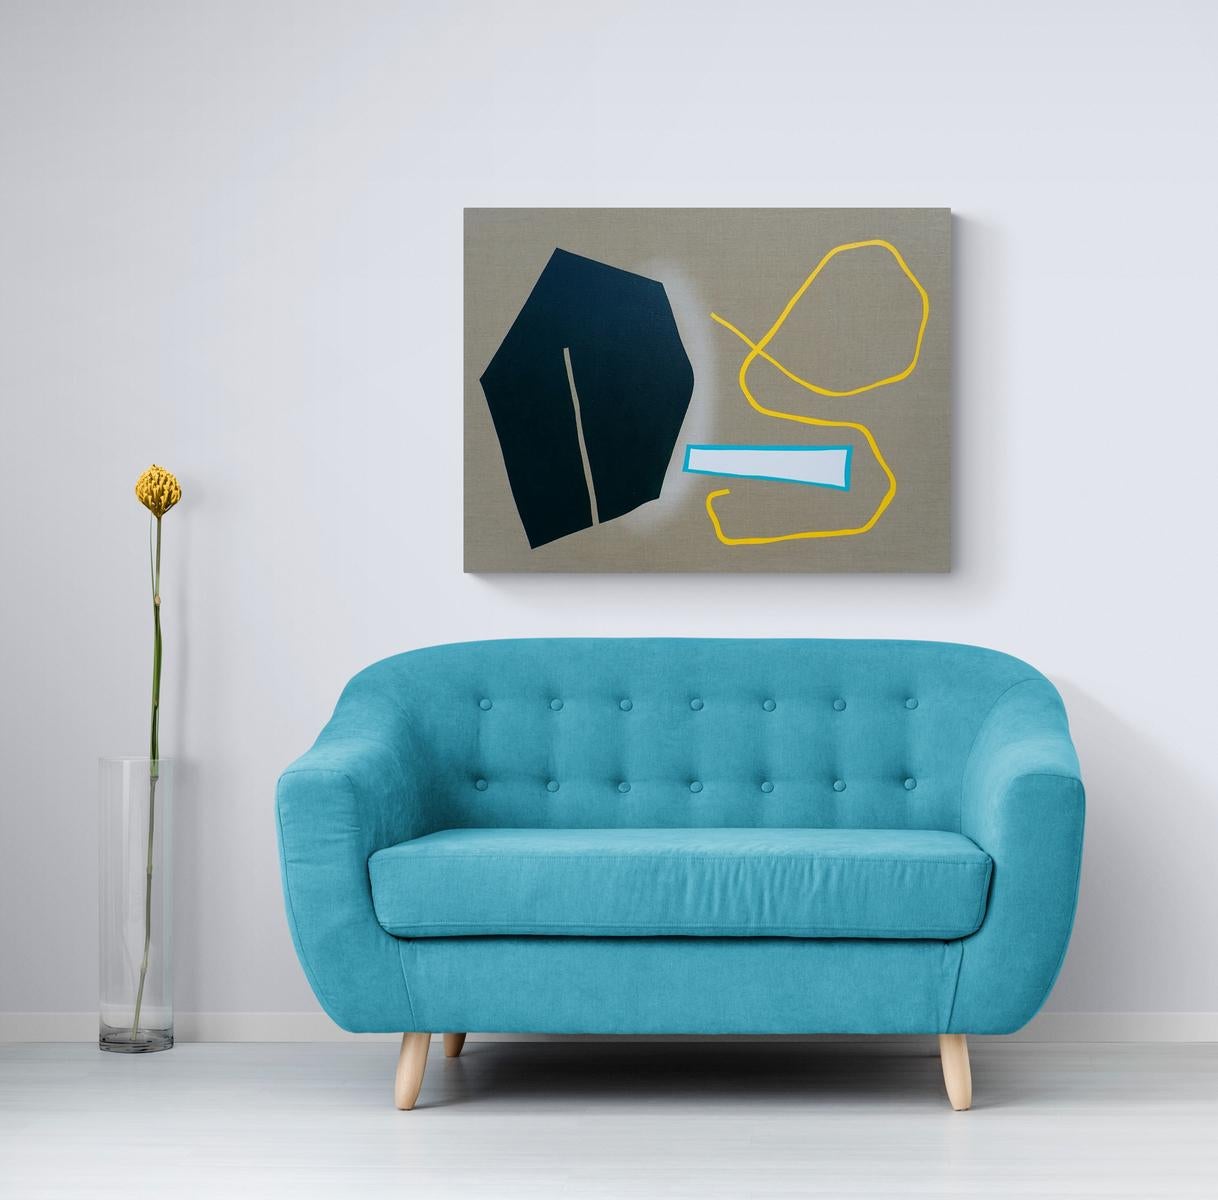 Split Green Shape with Long Yellow Line - colorful, abstract shapes on canvas - Gray Abstract Painting by Aron Hill